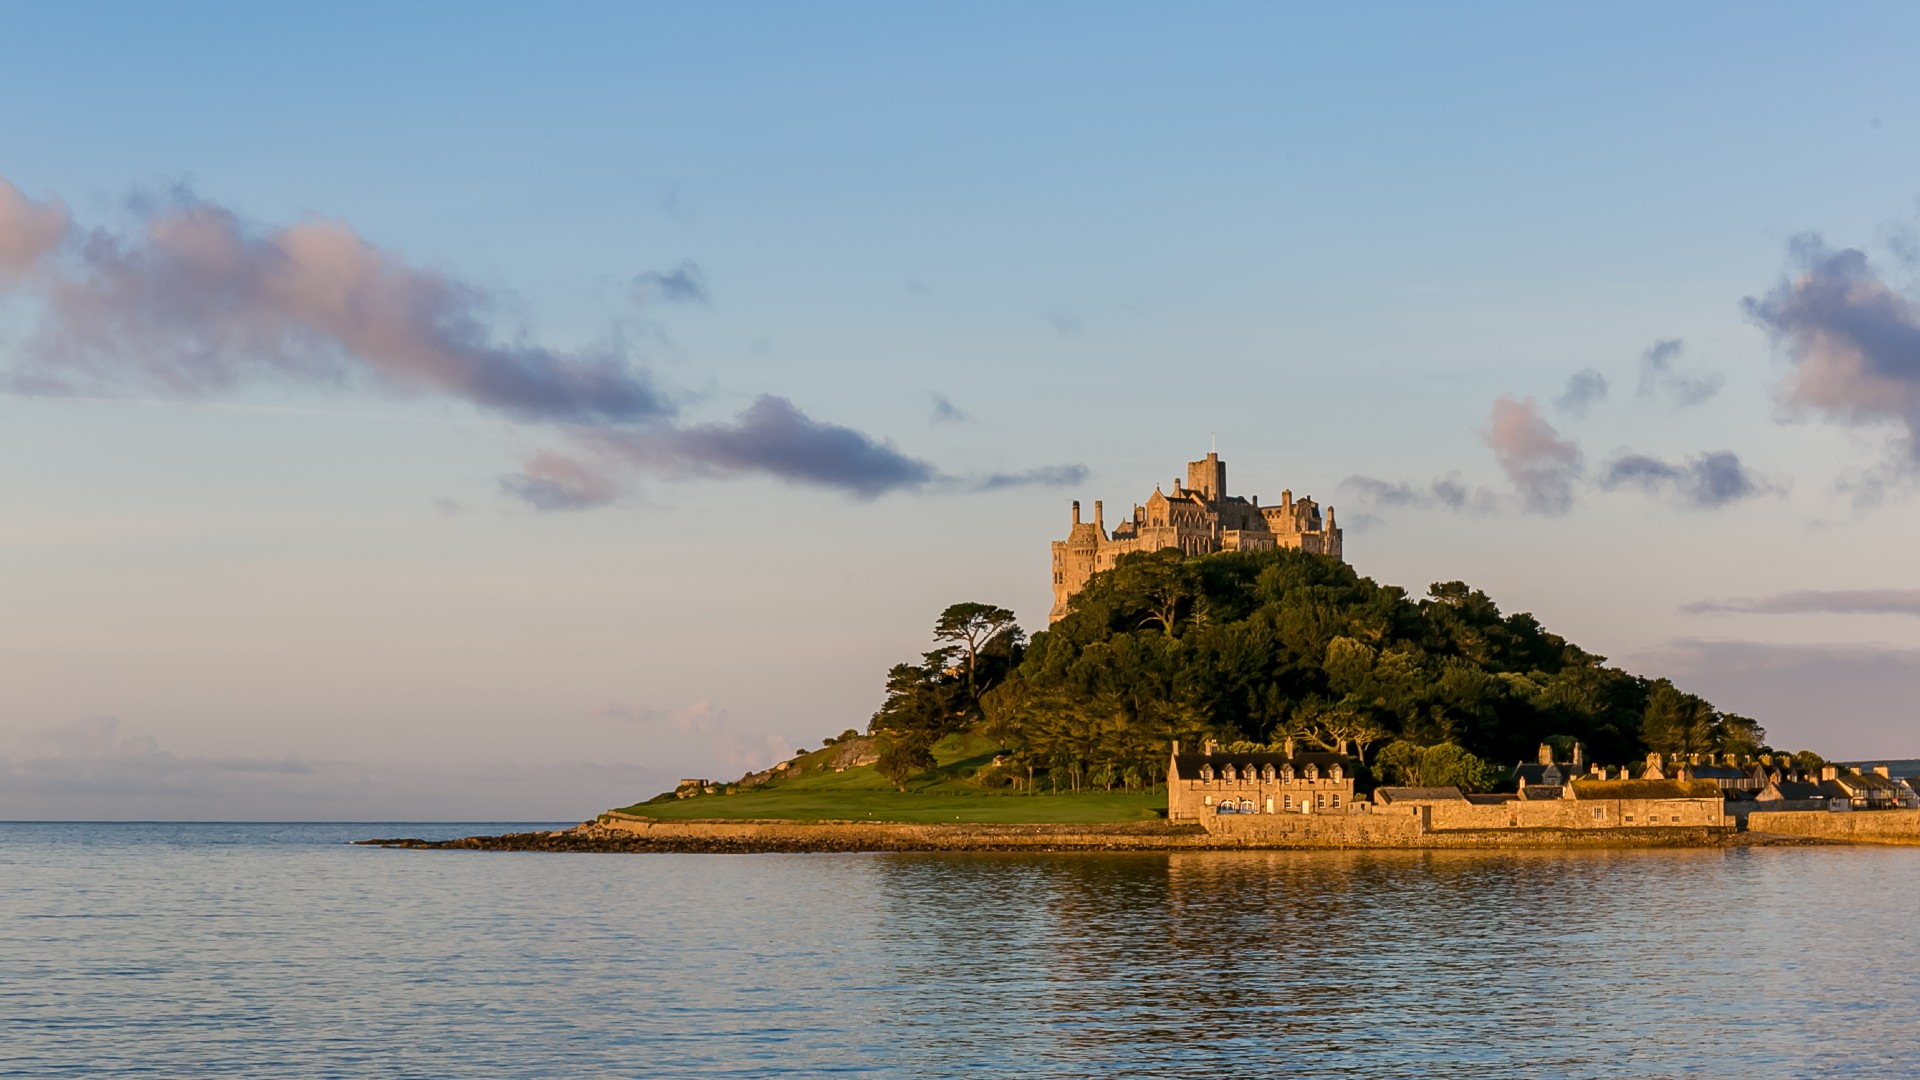 View across the water to of St Michaels Mount in Cornwall